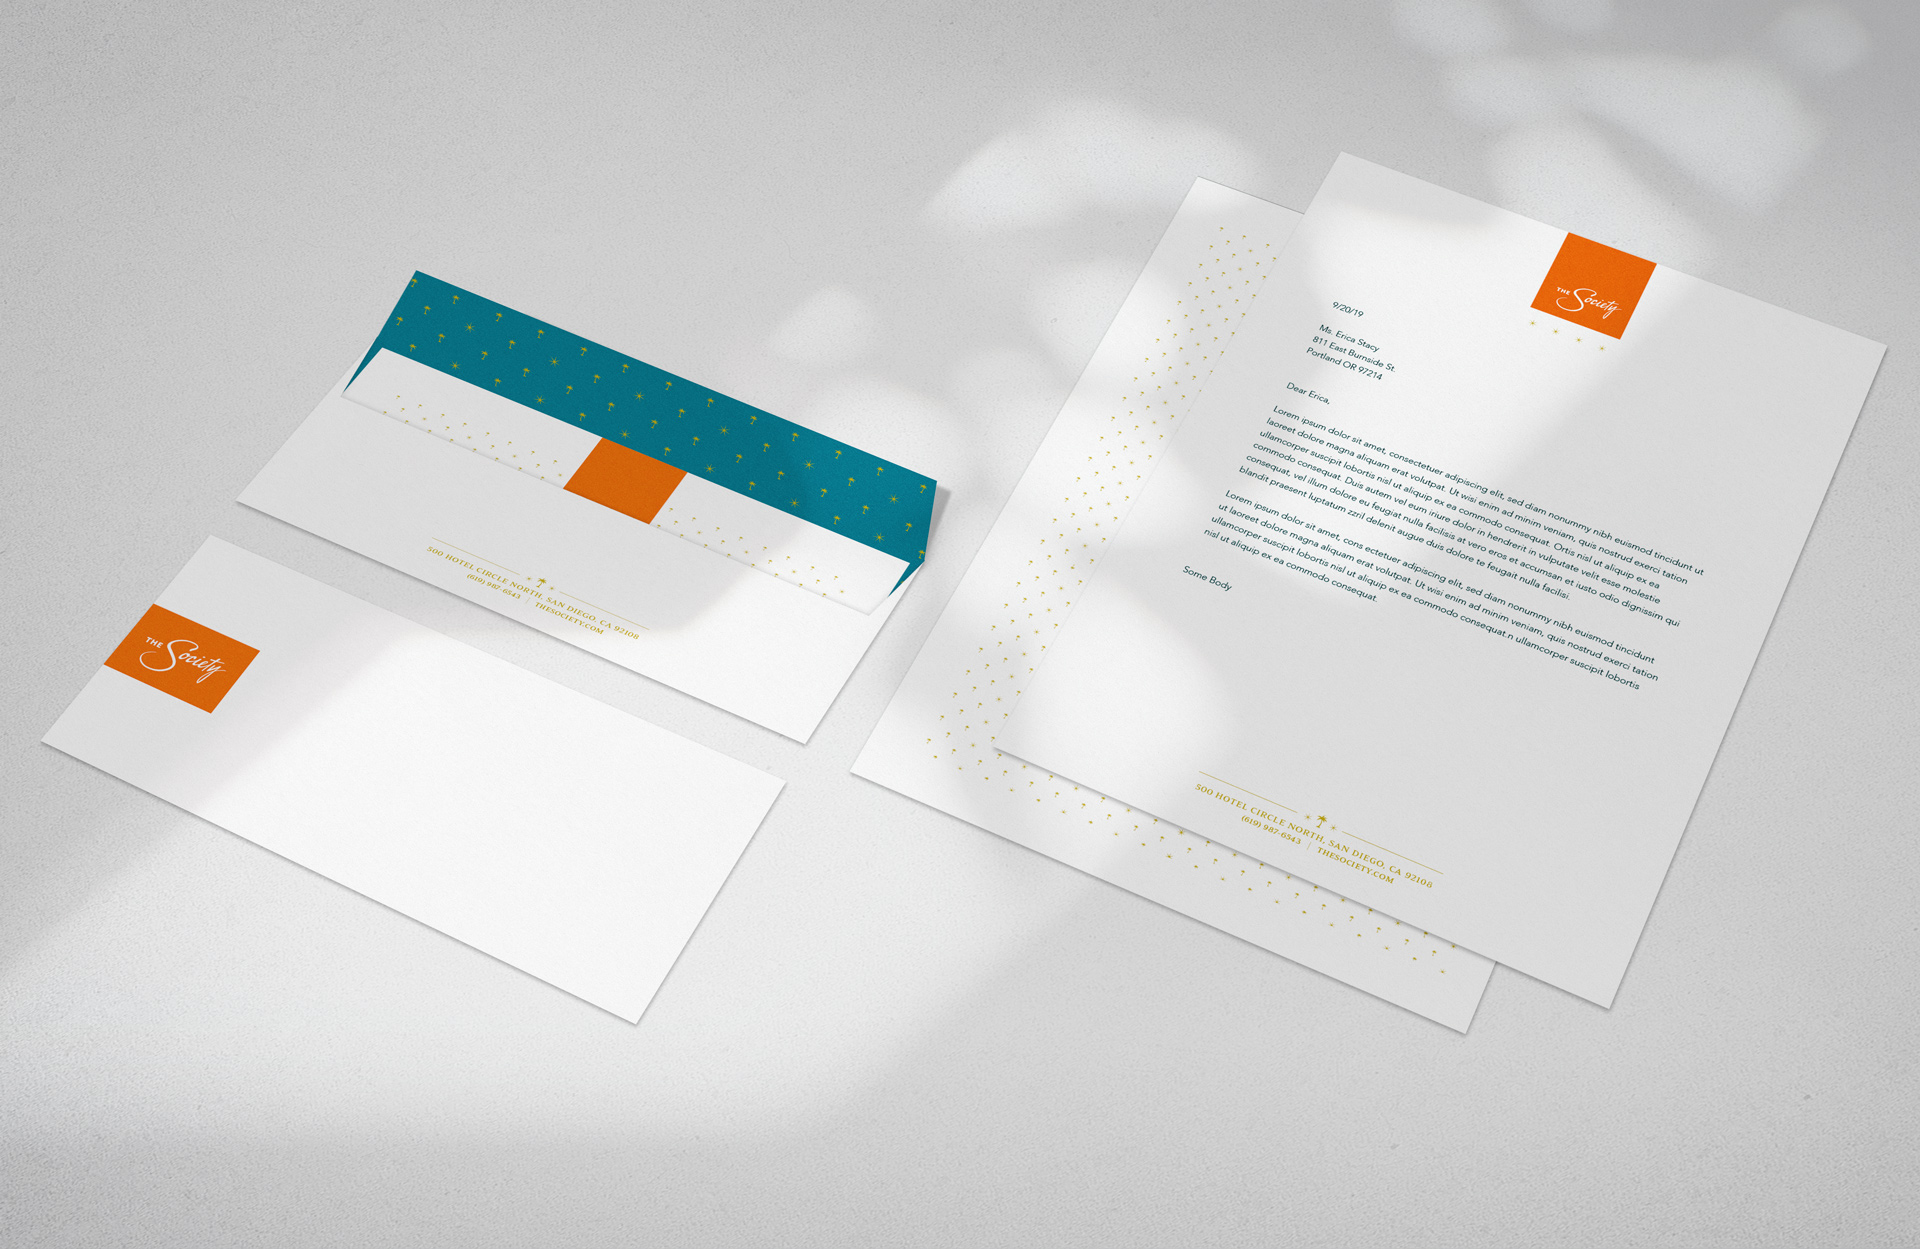 The Society apartments branding letterhead created by Incubate Design for Holland Residential